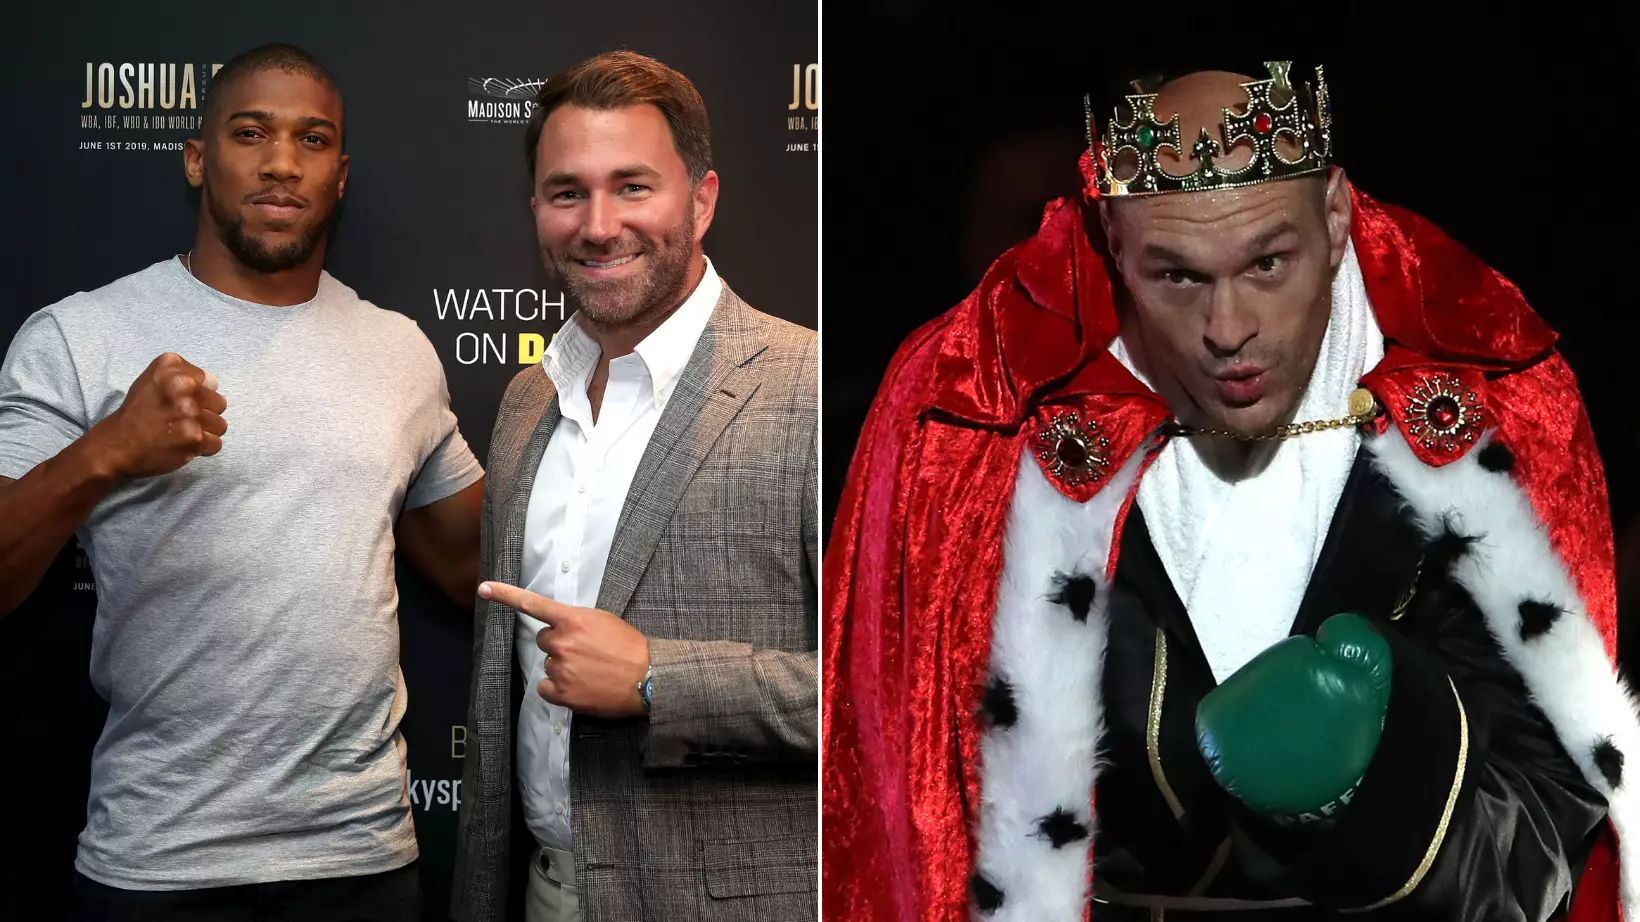 Tyson Fury Vs. Anthony Joshua Tipped To Shatter Pay-Per-View Record